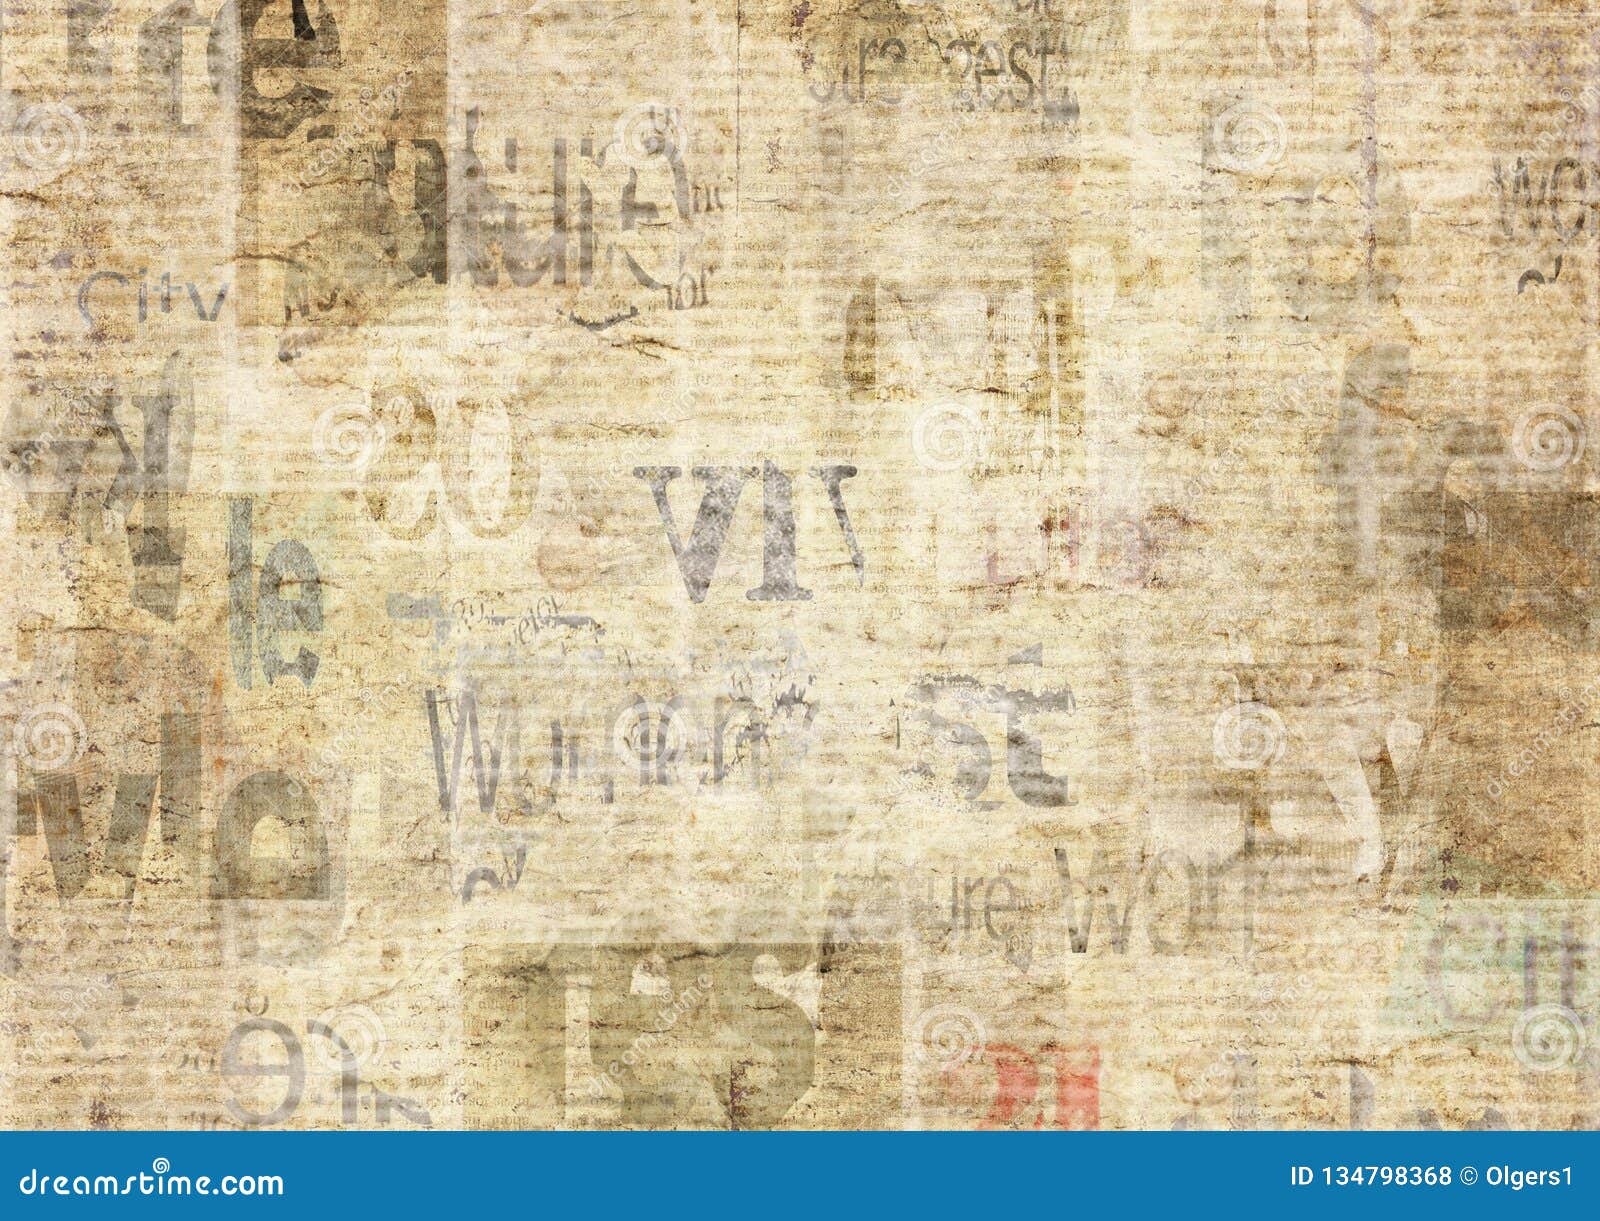 Newspaper With Old Grunge Vintage Unreadable Paper Texture Background Stock Photo Image Of Backdrop Journalist